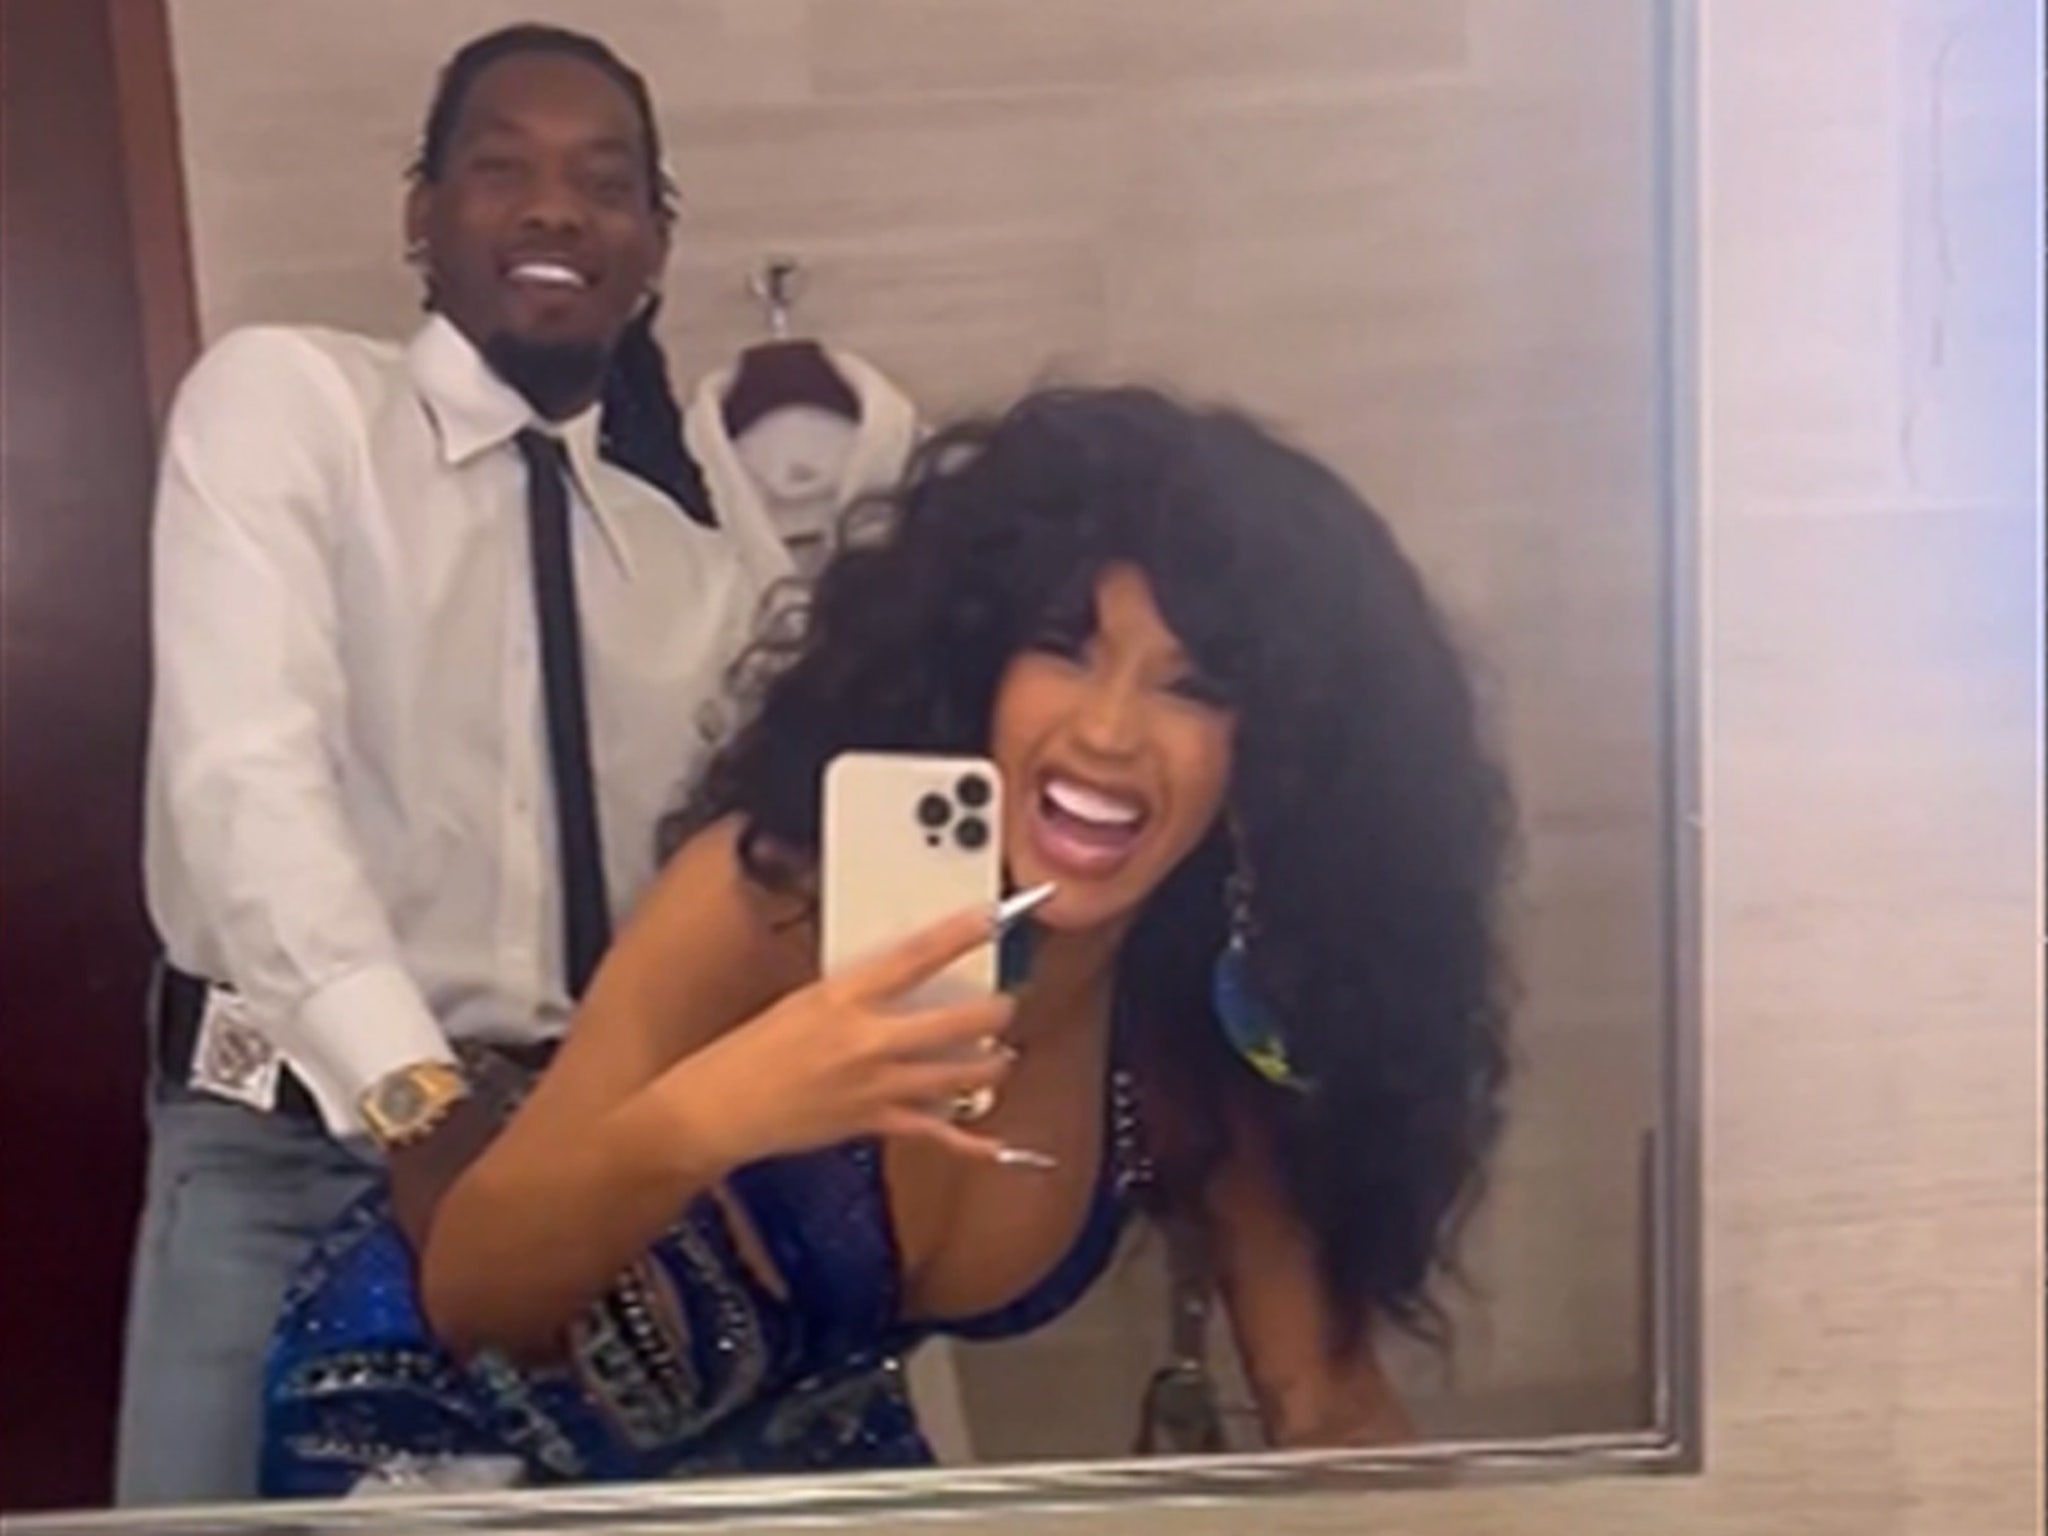 Little Champs Full Sex - Cardi B Shares Raunchy Clip From VMAs, Pretends to Bang Offset in Bathroom